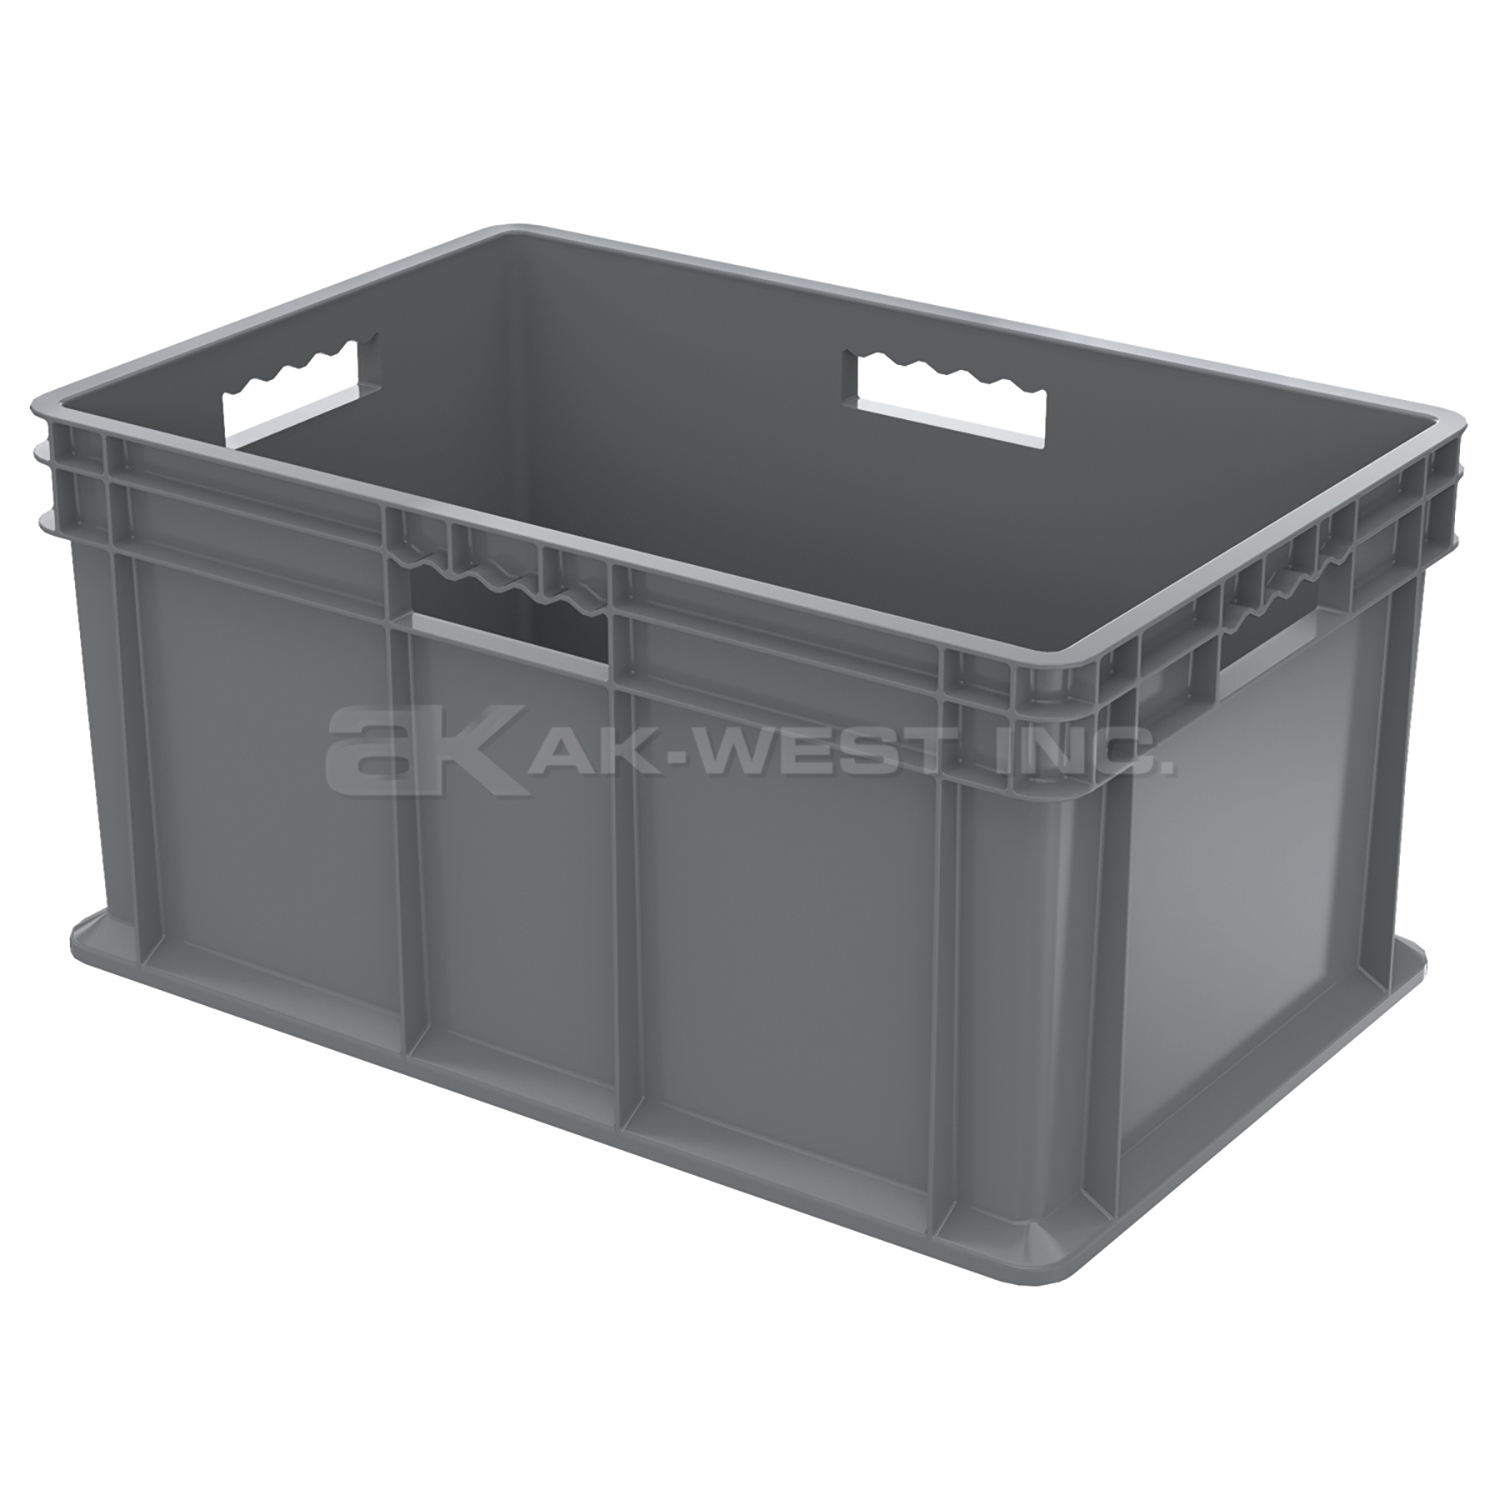 Grey, 23-3/4" x 15-3/4" x 12-1/4", Solid Side and Base, Straight Wall Container (3 Per Carton)